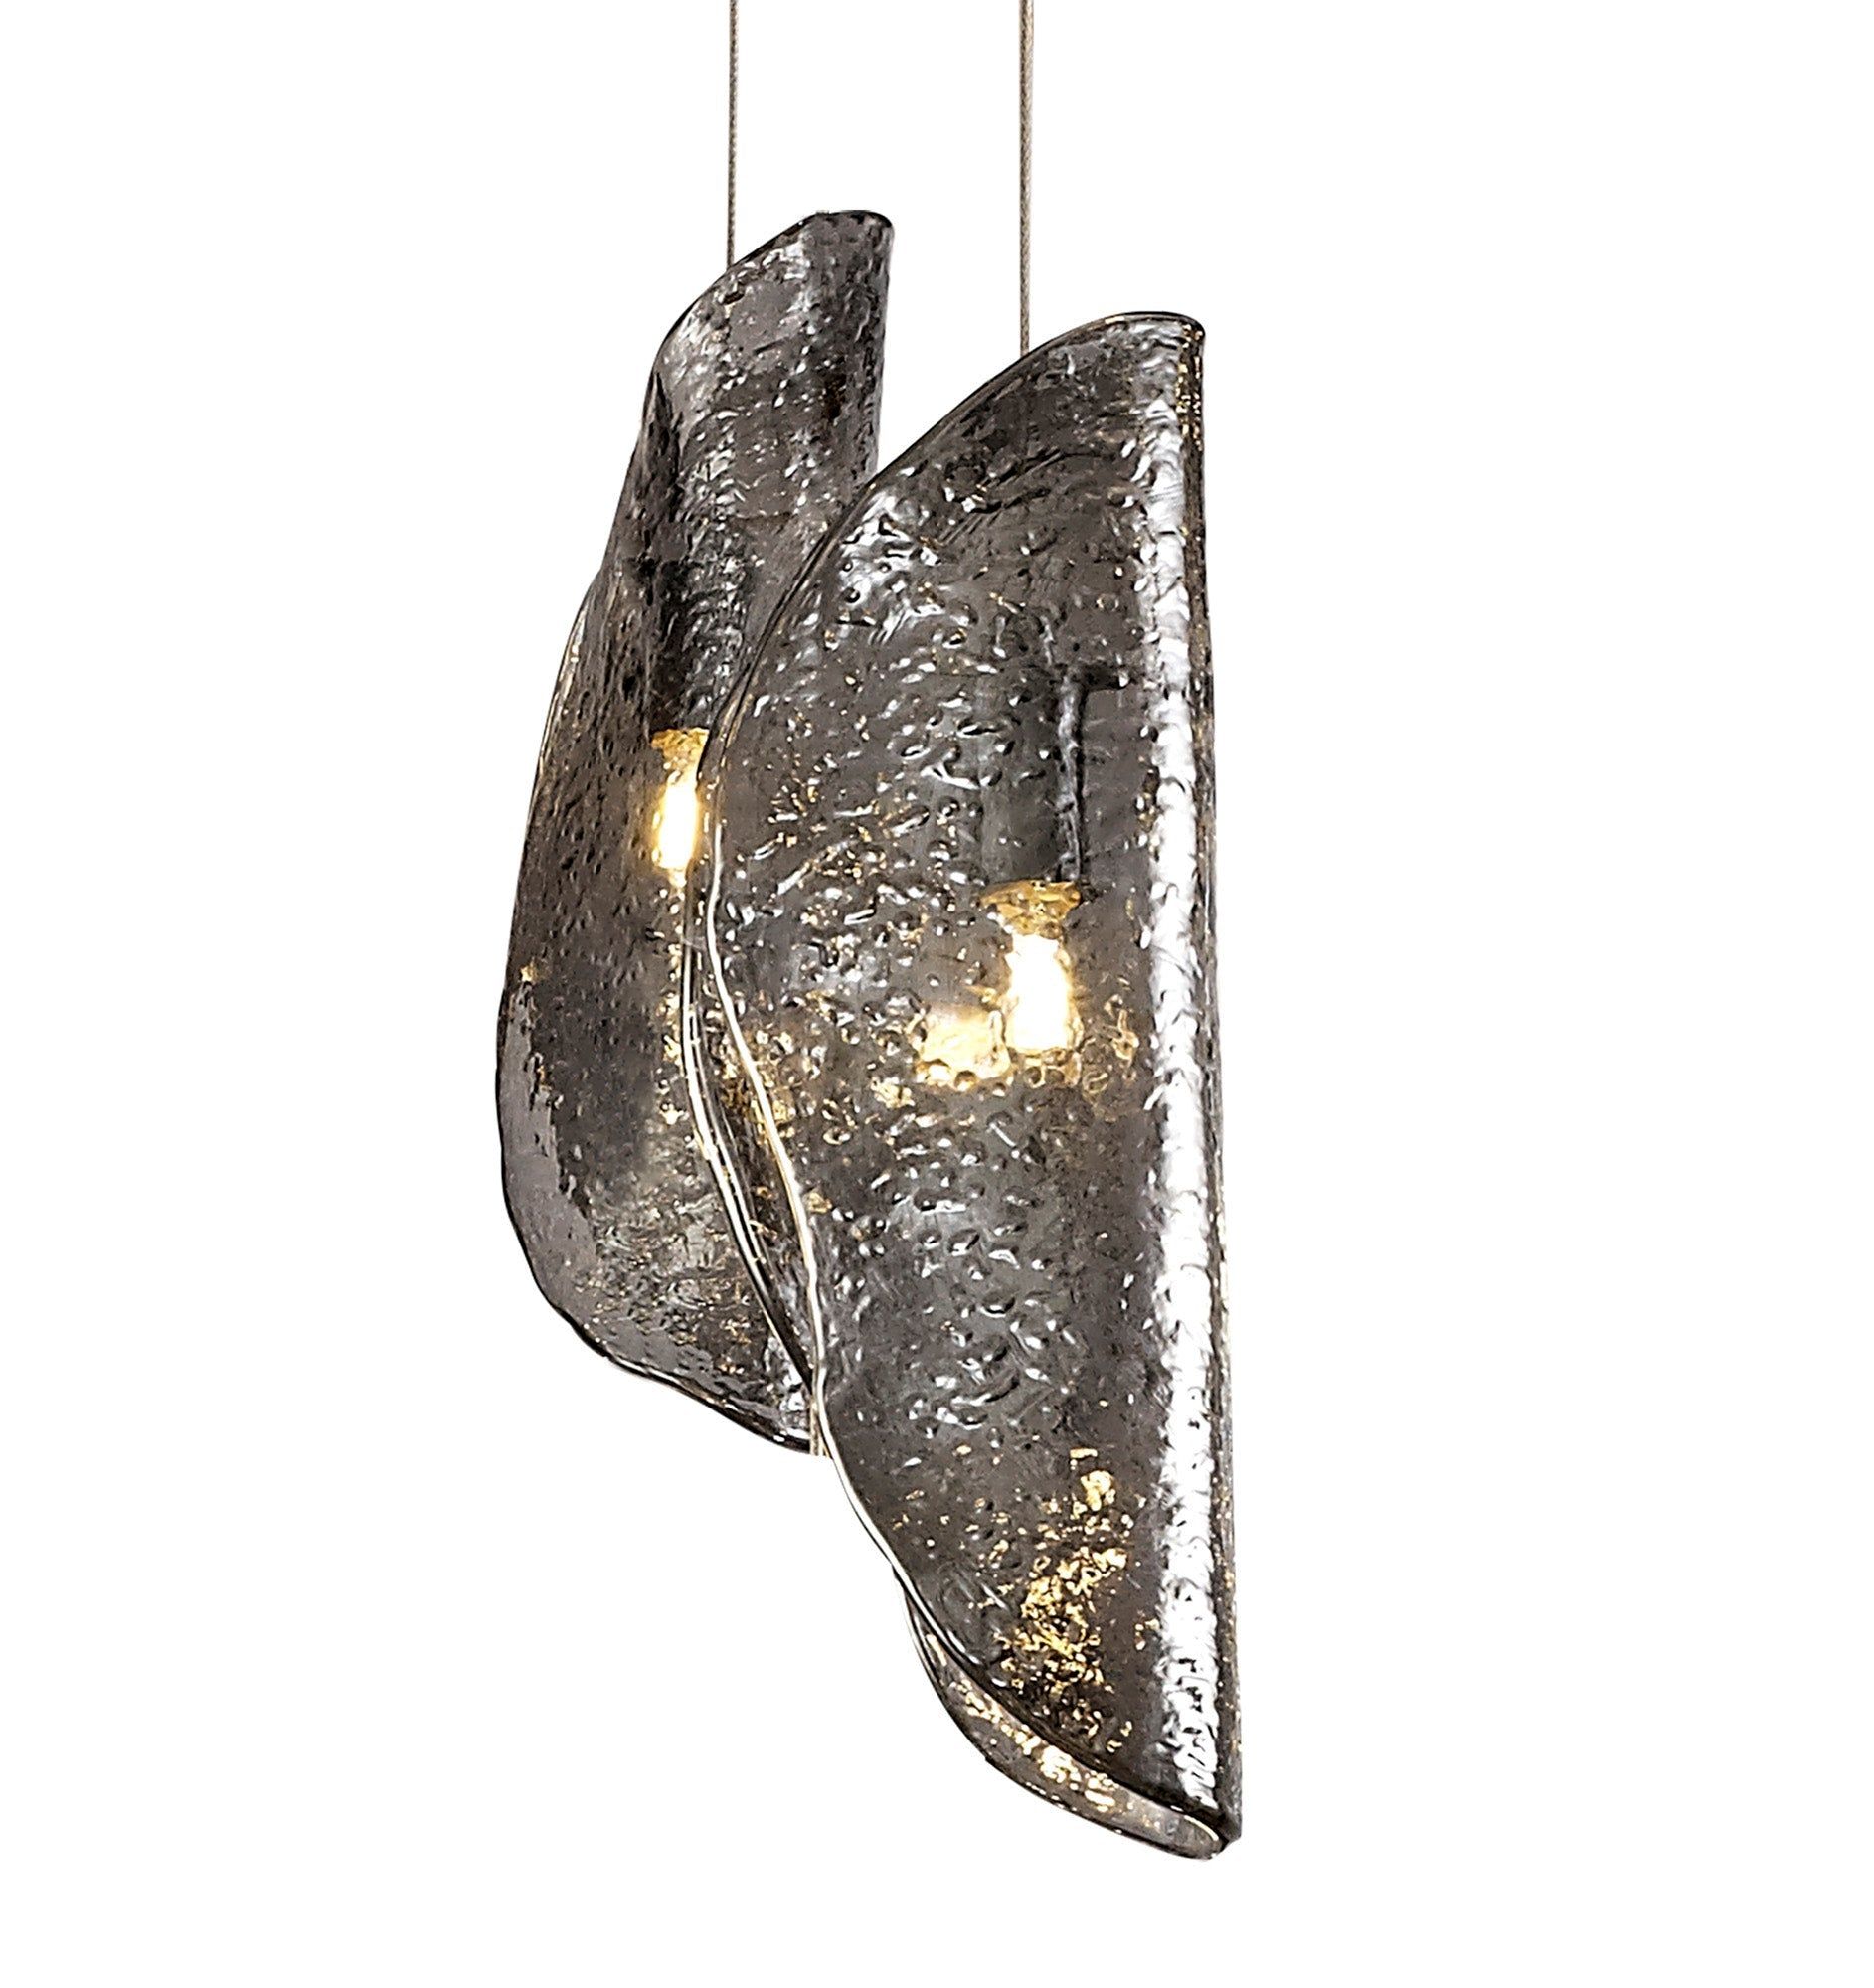 Syros Pendant 5m, 21 x G9, Polished Chrome/Clear & Amber & Smoked Glass Item Weight: 28.1kg